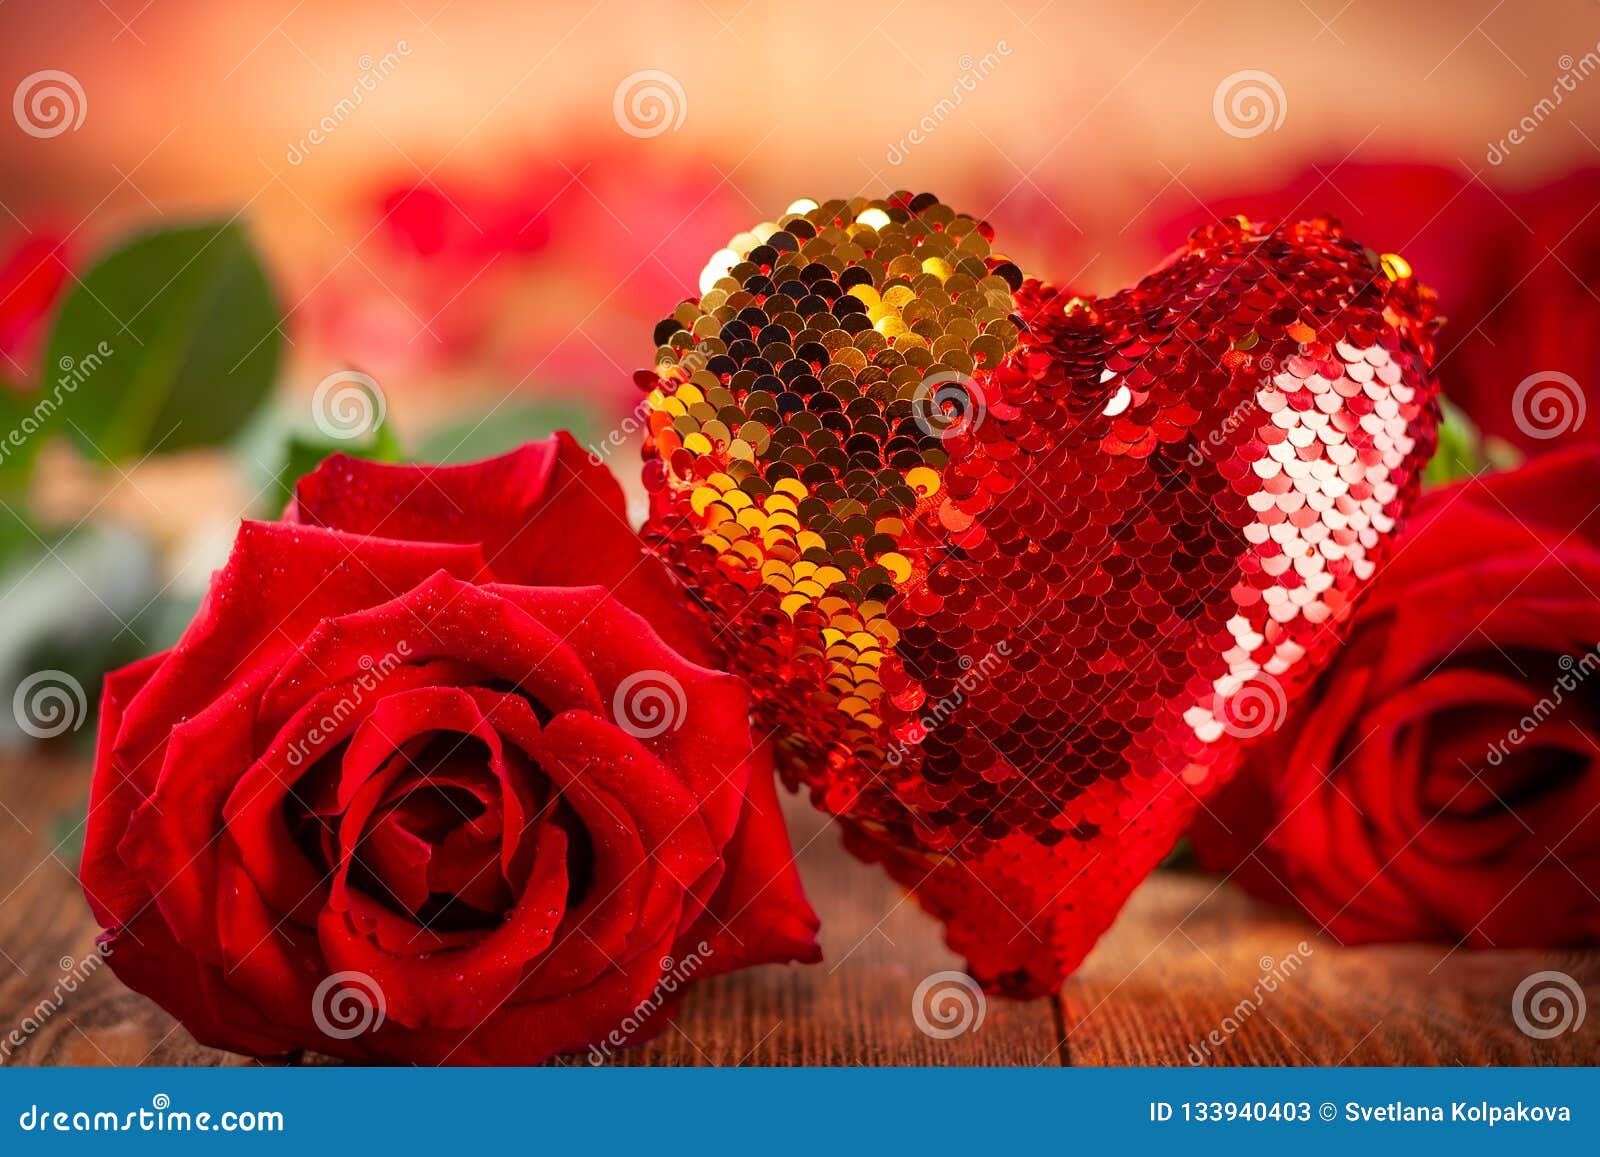 Beautiful Red Roses and Heart Stock Image - Image of composition ...